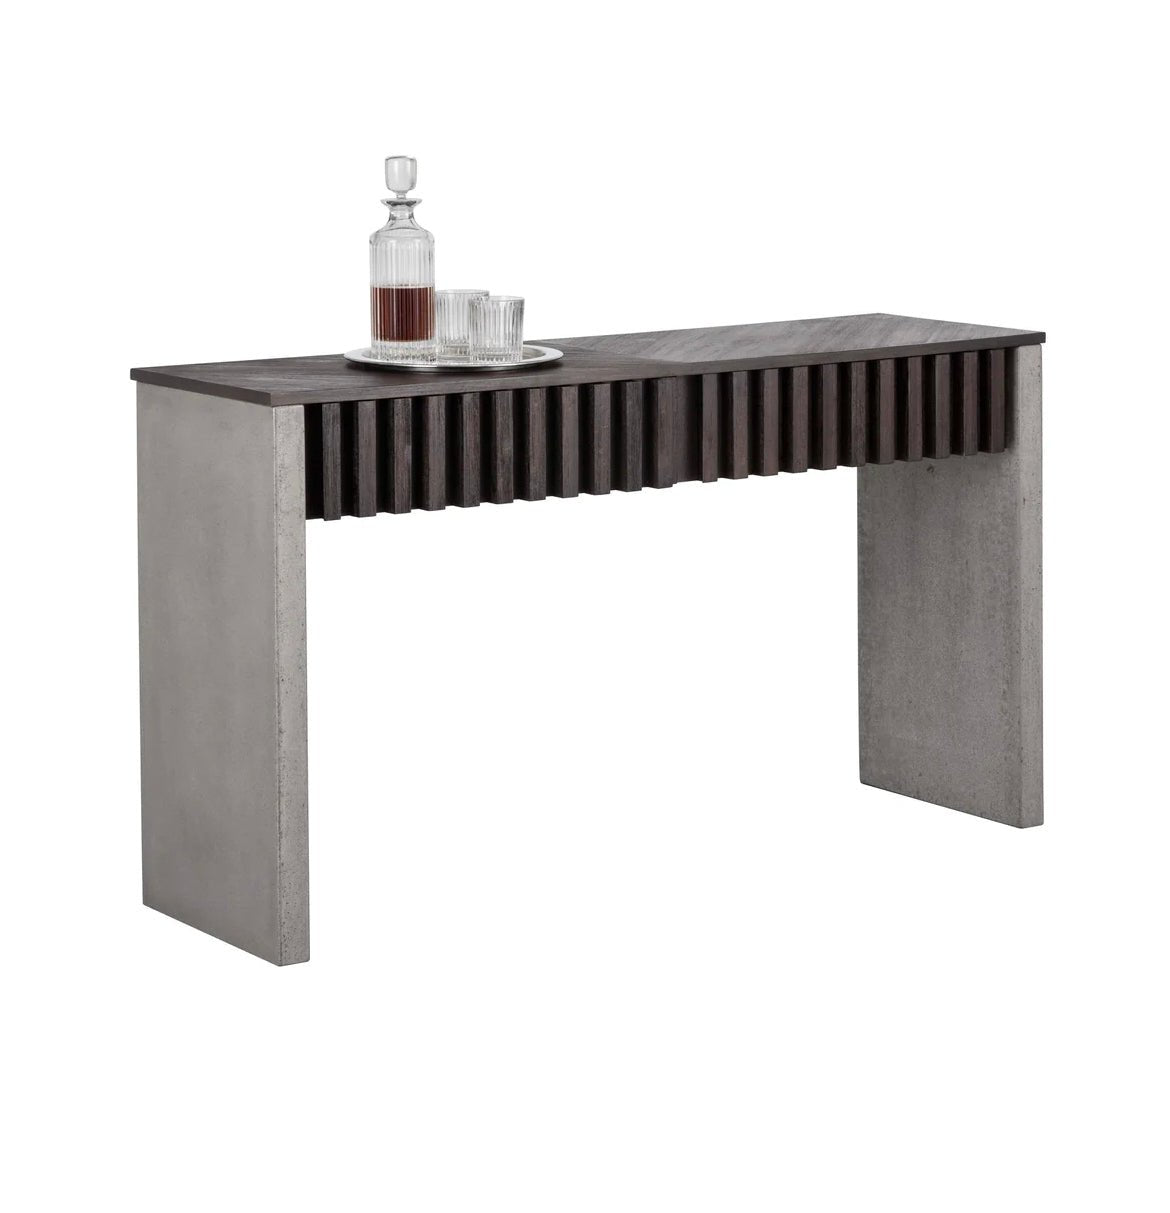 ‘Bane’ Console Table - EcoLuxe Furnishings